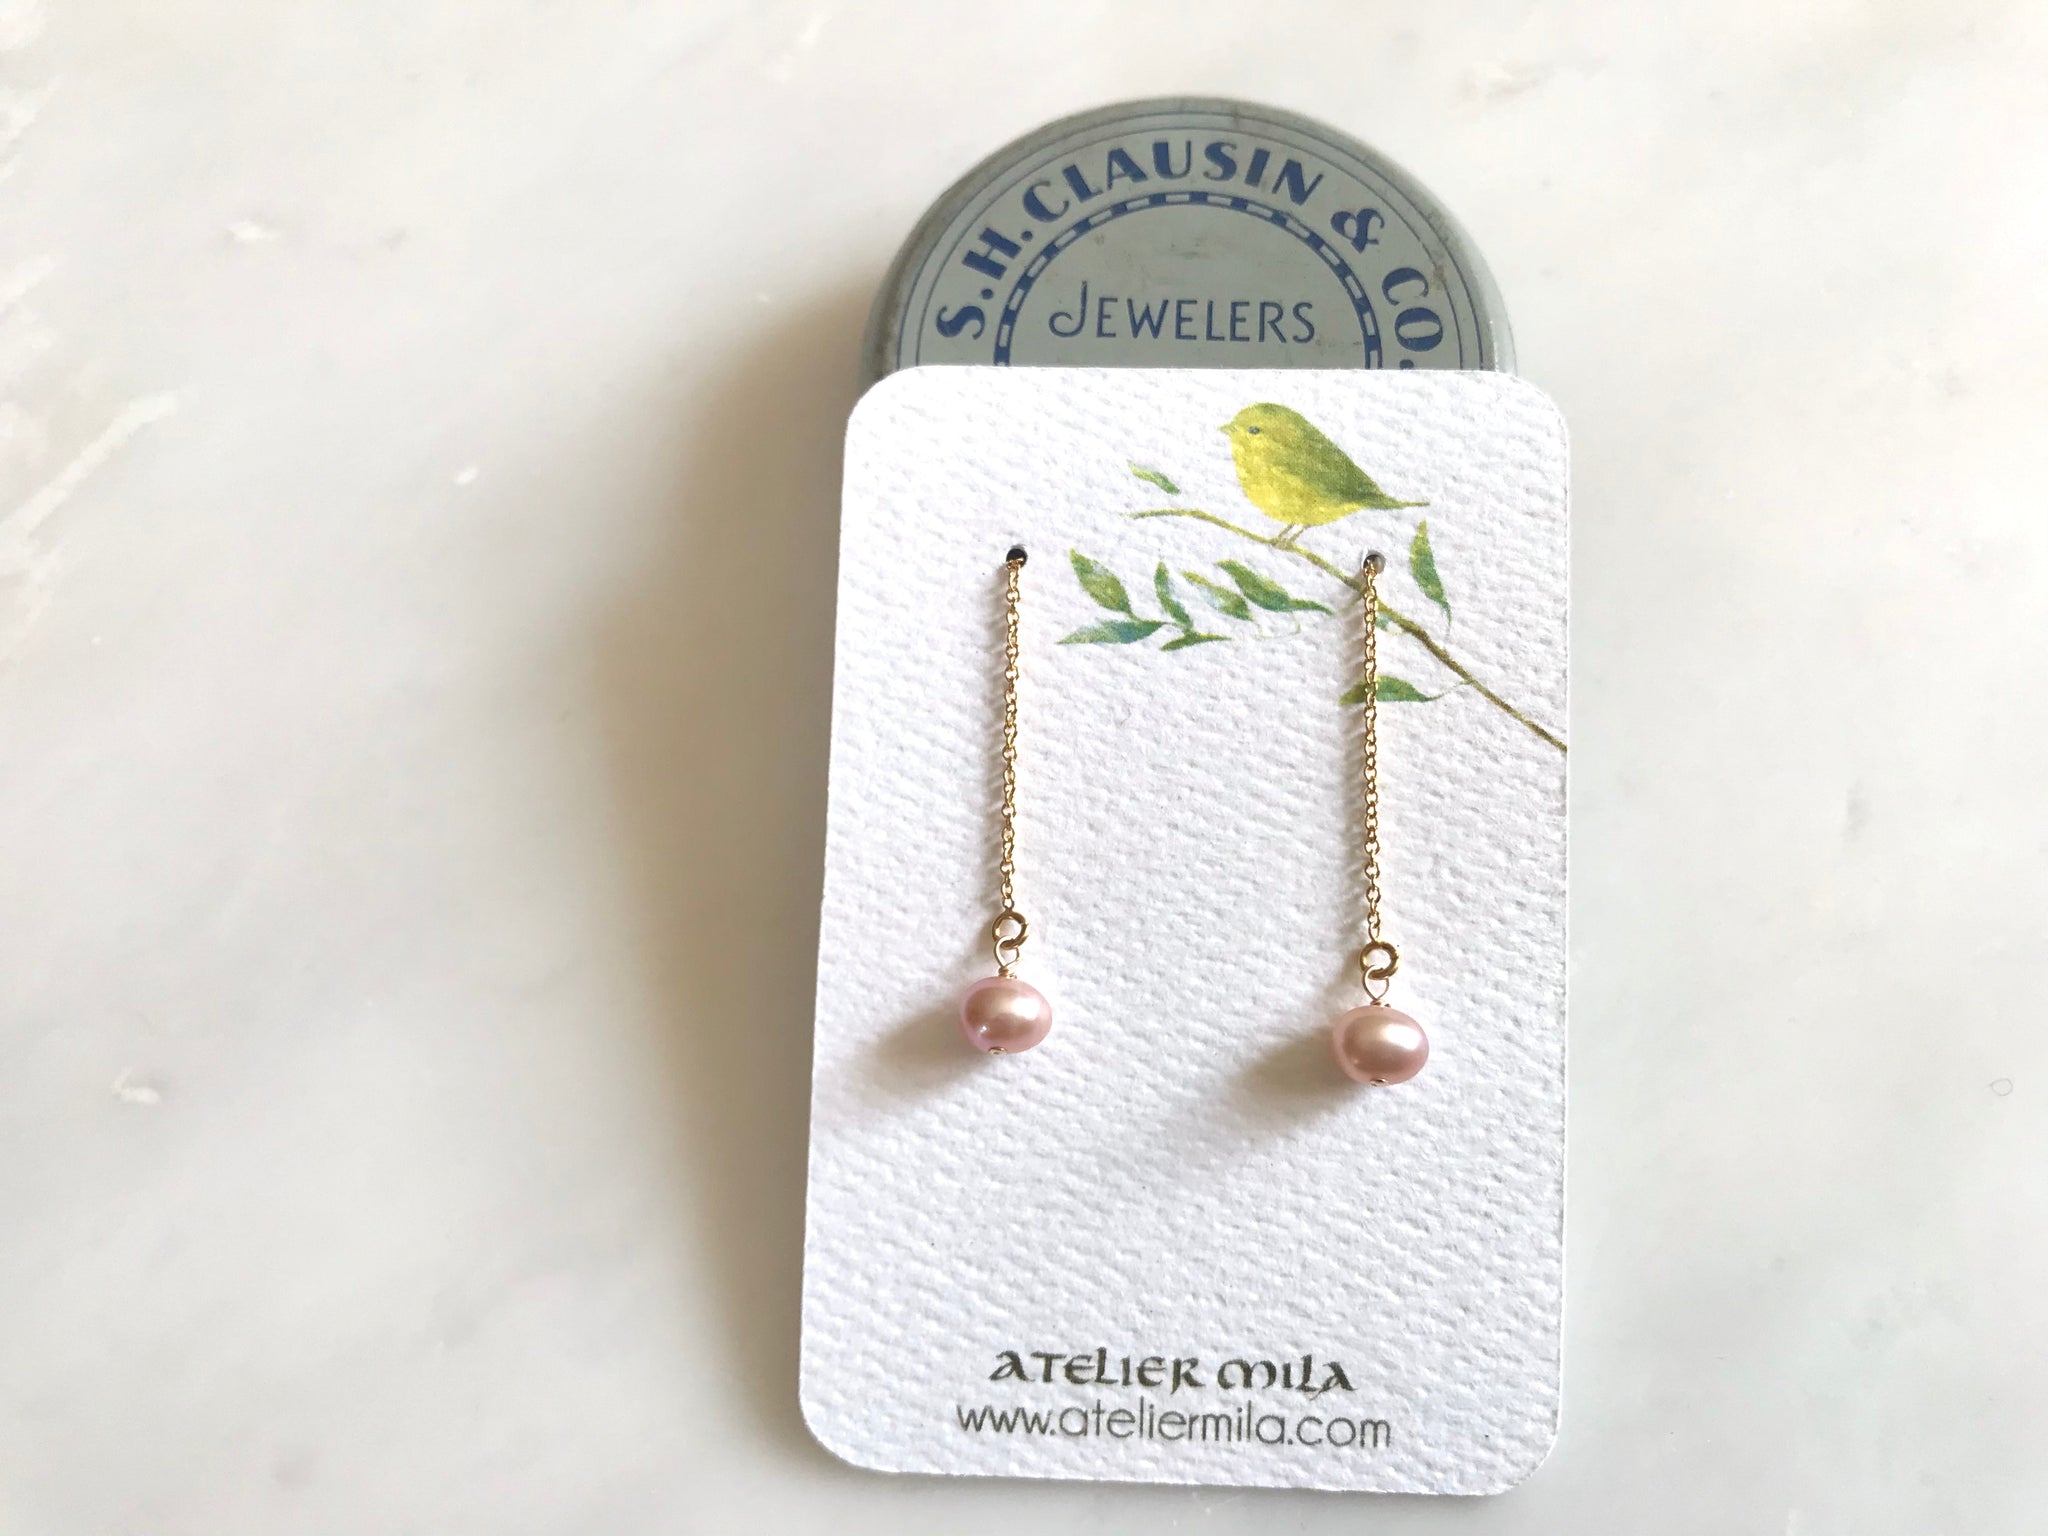 Fresh Water Pearl Pink Thread Earrings 14K Gold-Filled / 淡水パール　ピンク　スレッド 14K ゴールドフィルド